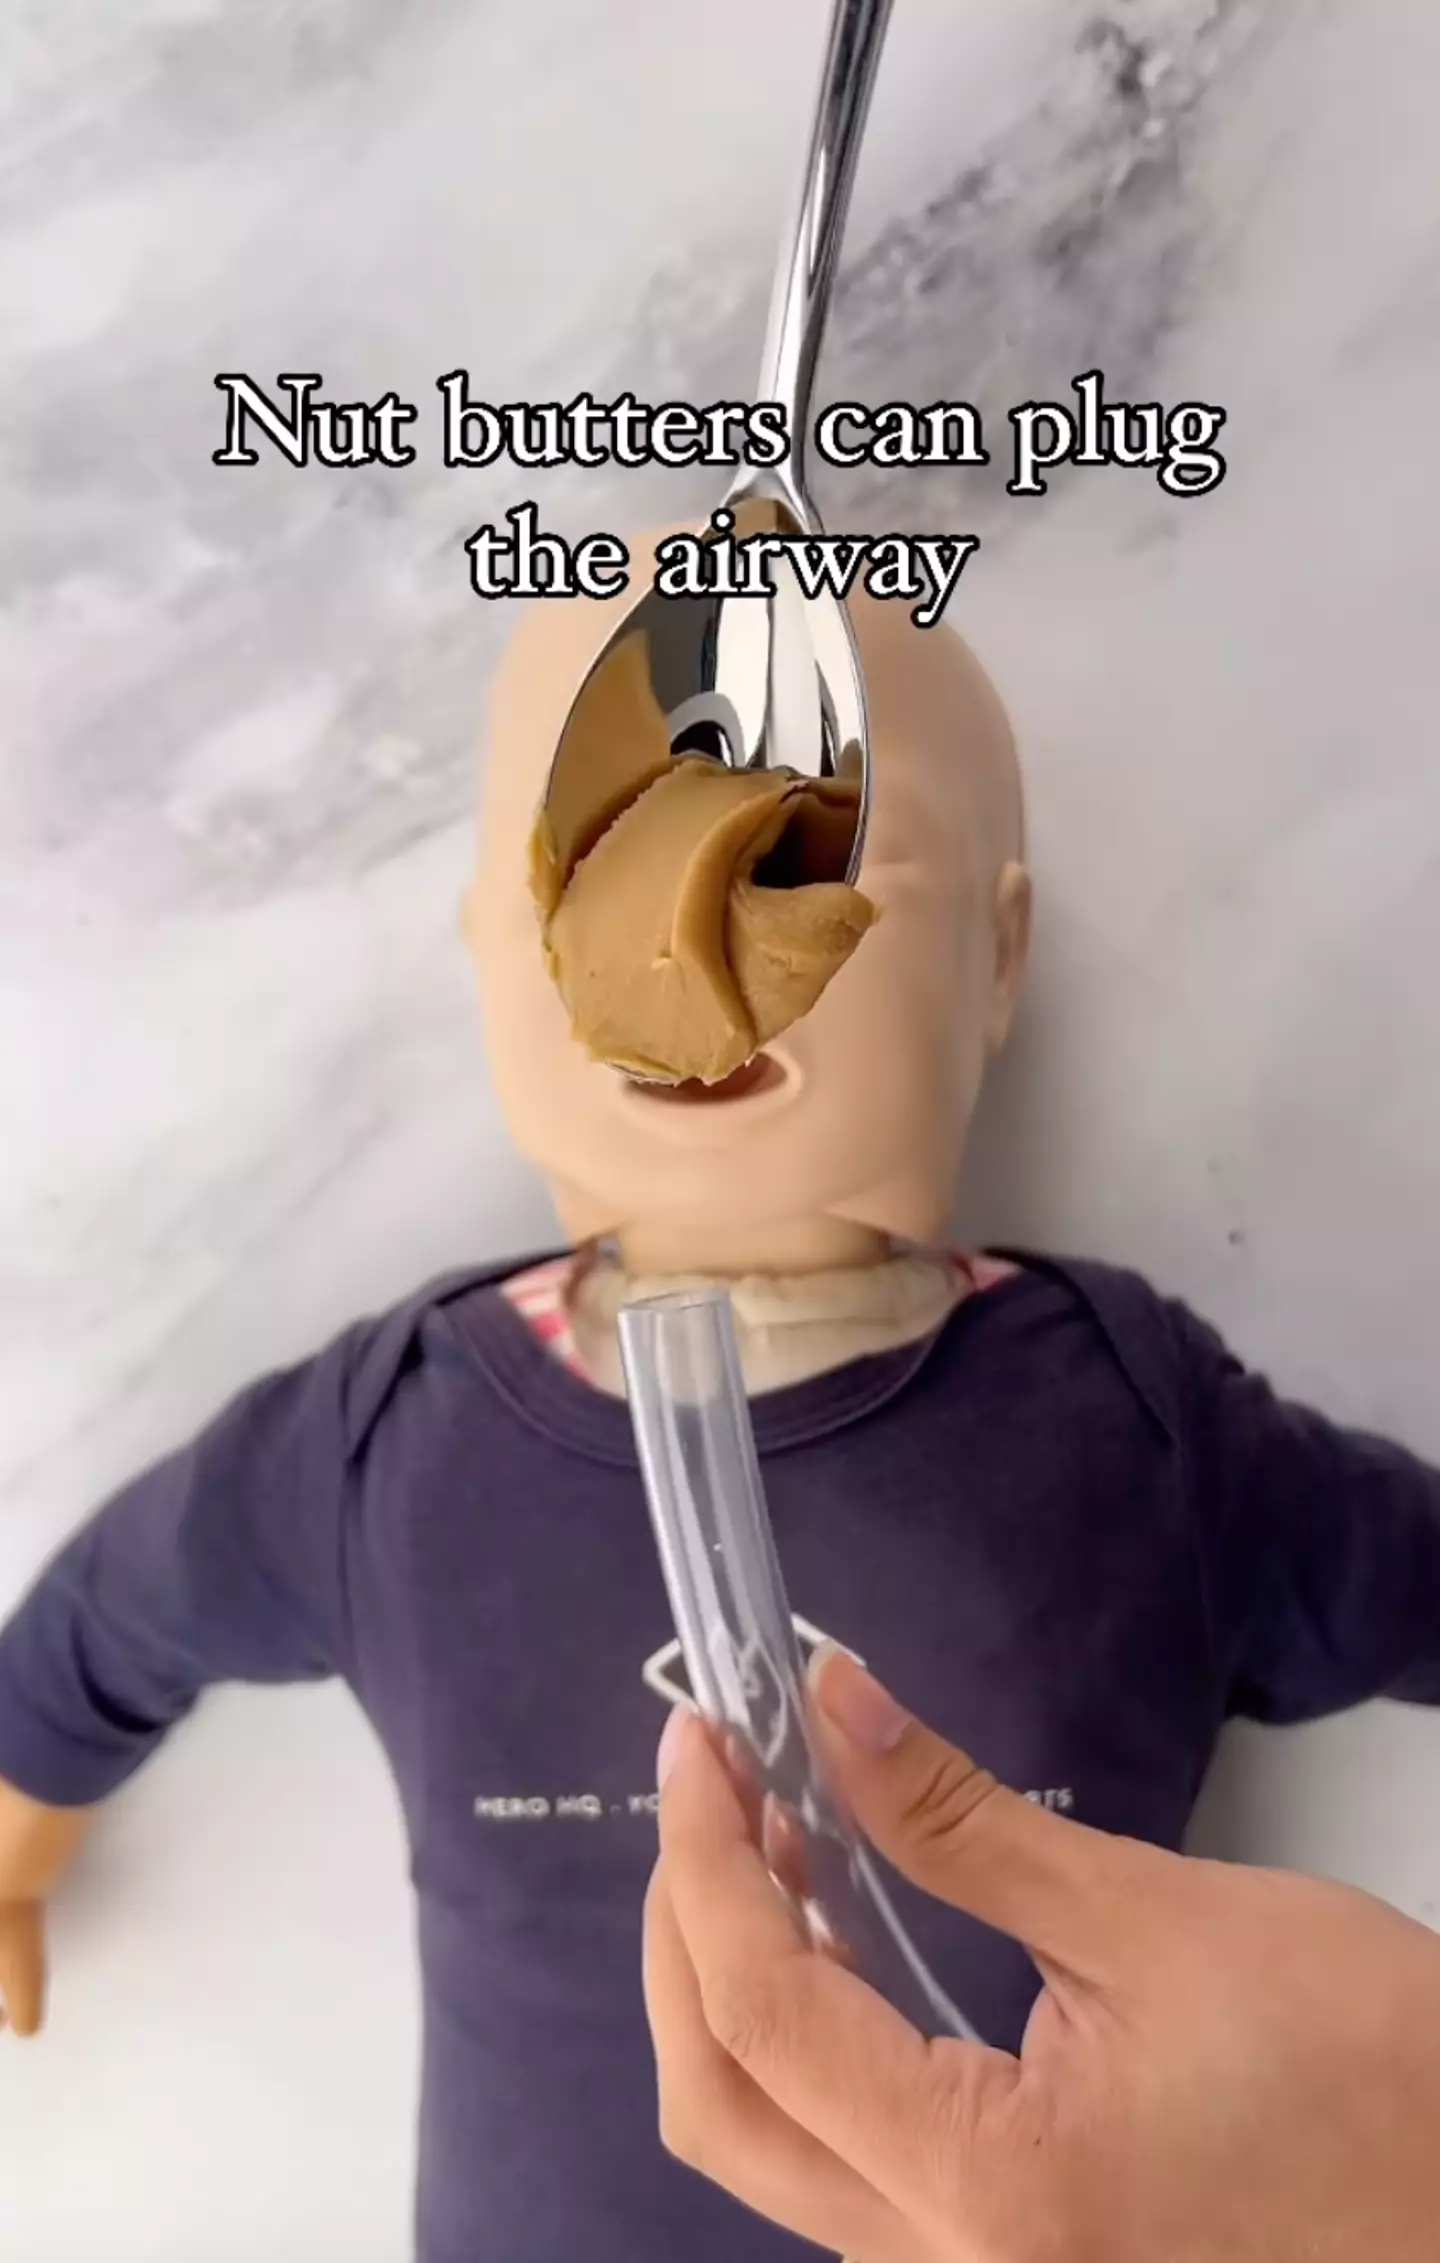 She said nut butters can 'plug' the airway. (Instagram/@tinyheartseducation)